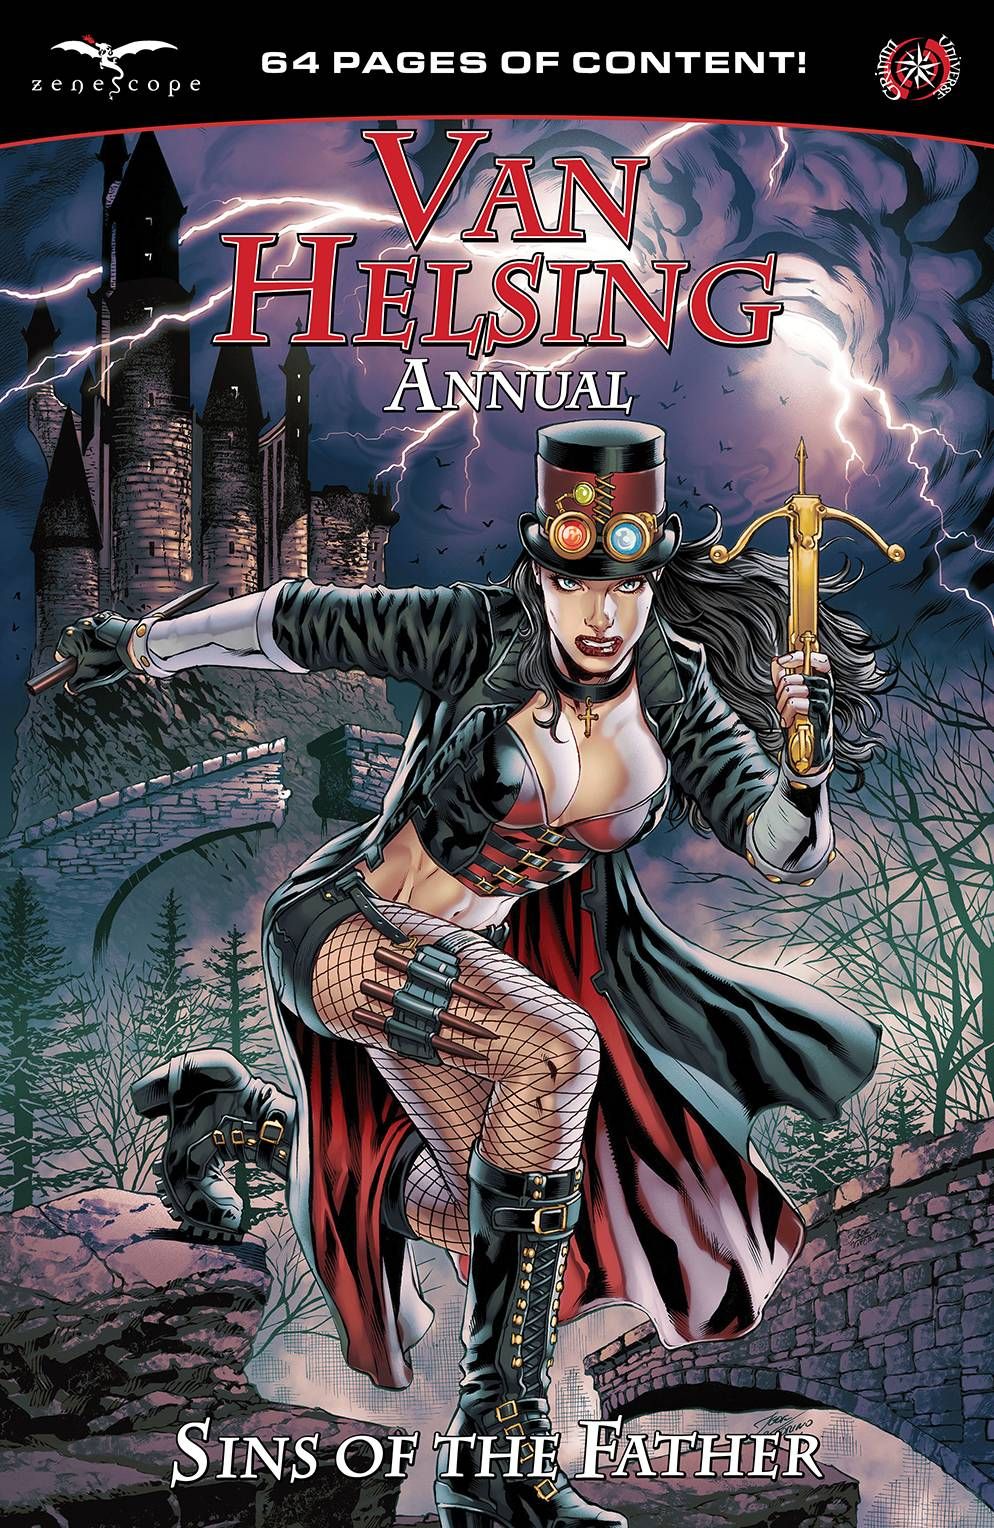 Van Helsing Annual: Sins of the Father Comic